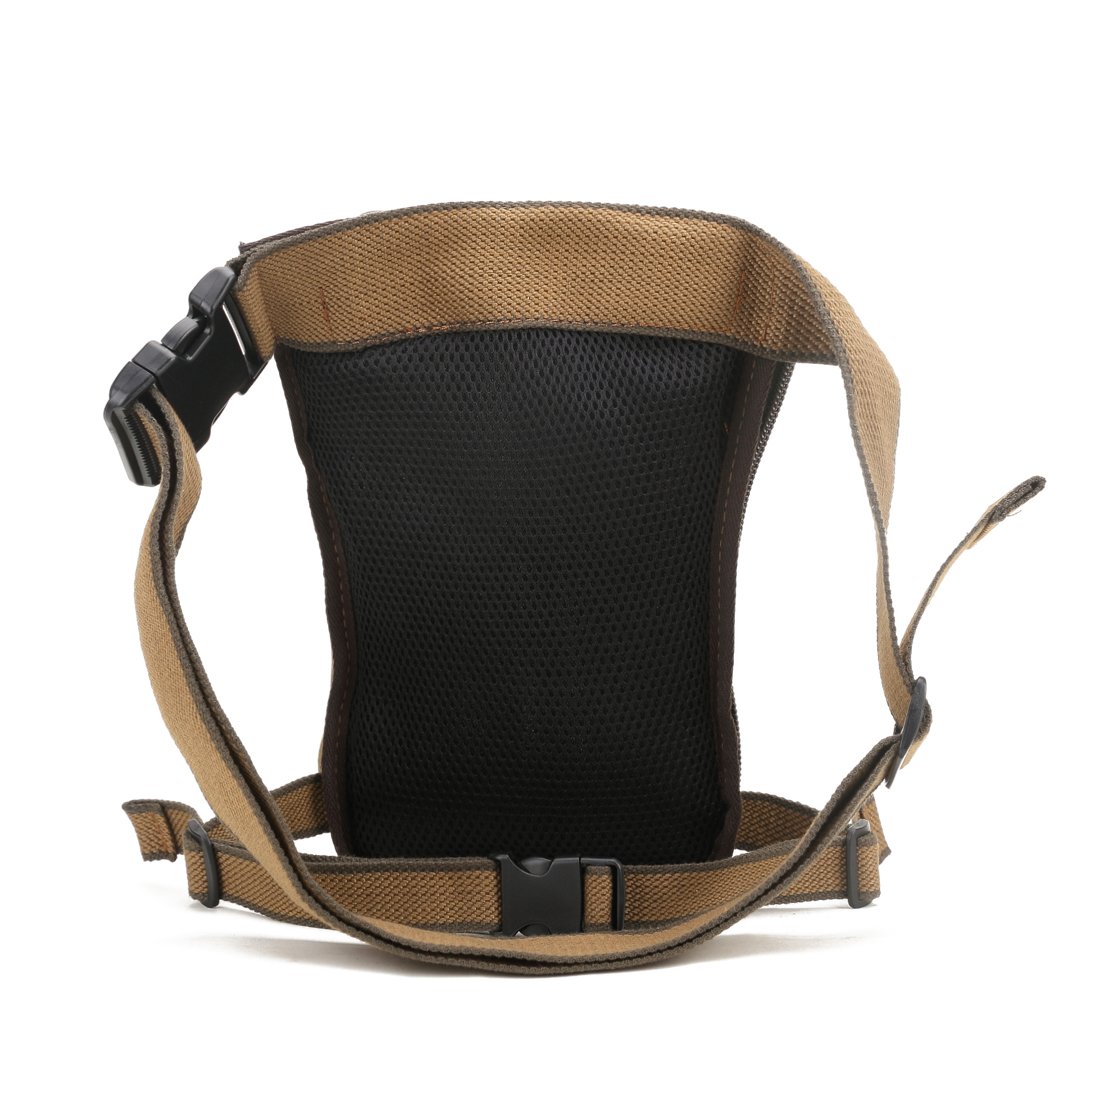 Hebetag Drop Leg Bag Canvas Thigh Pouch for Men Women Tactical Military Motorcycle Bike Cycling Multi-Pocket Waist Fanny Pack Travel Hiking Climbing Outdoor Pocket Coffee